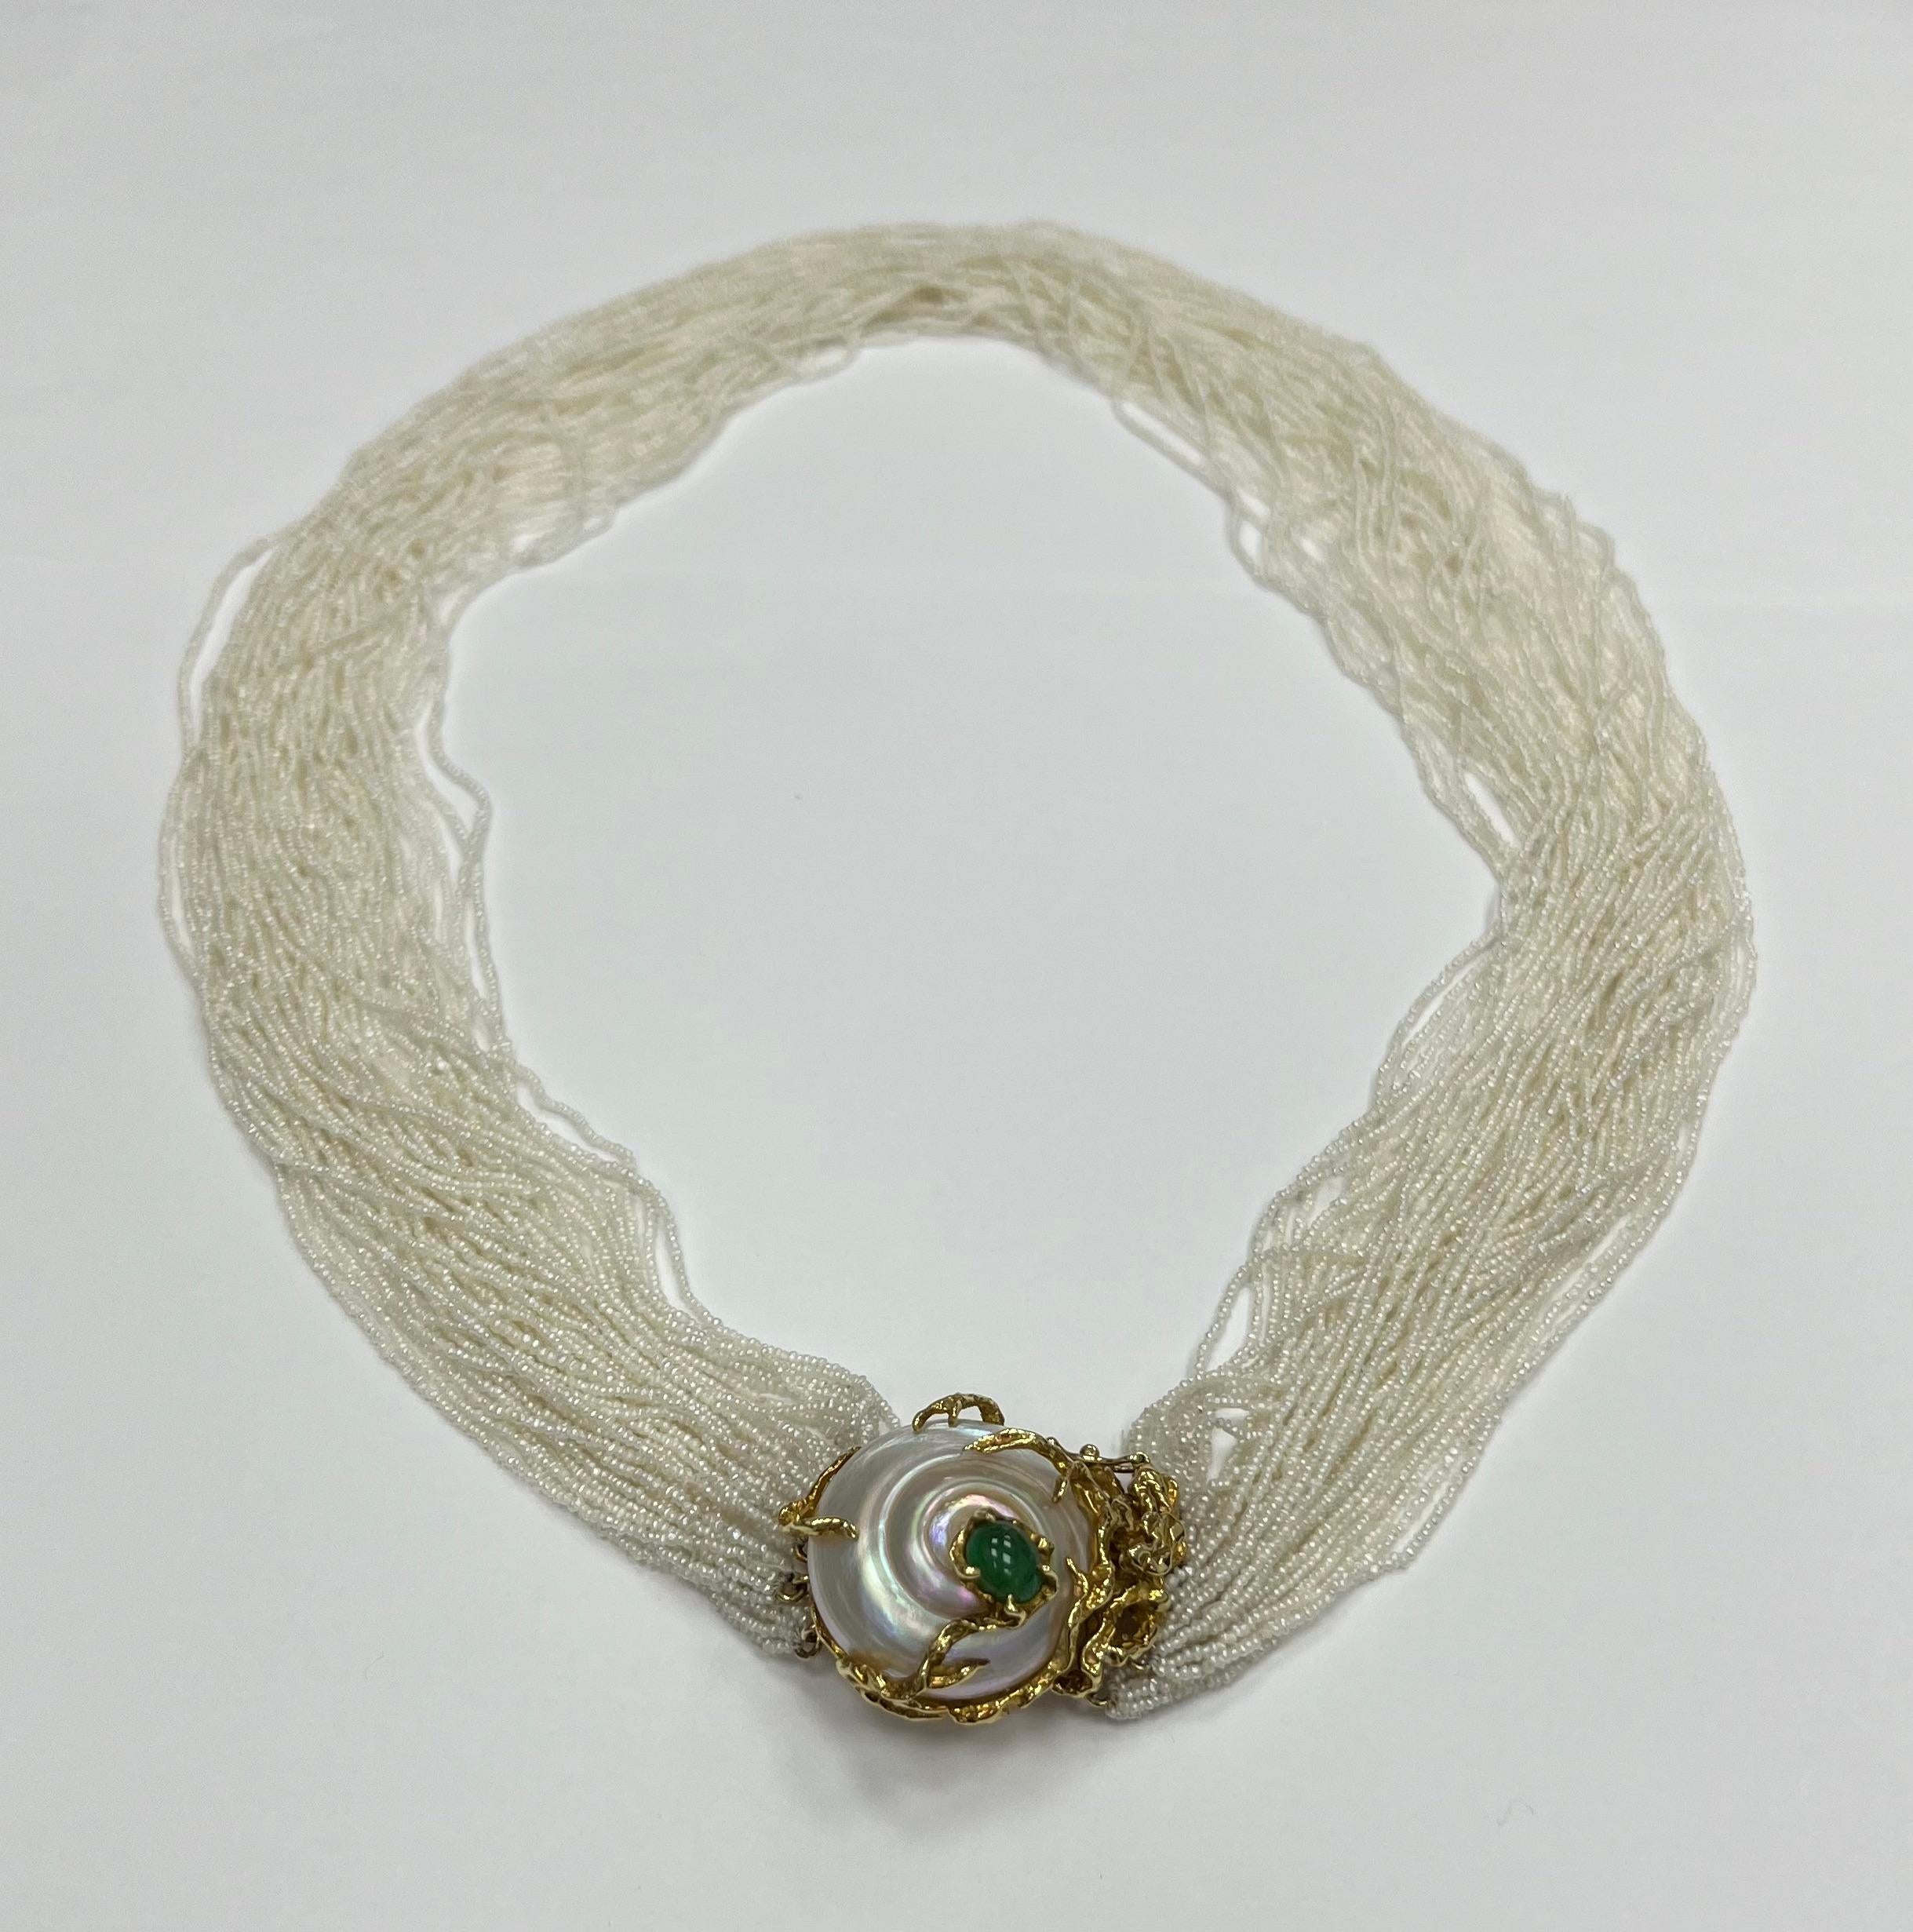 1950' Arthur King multi strand natural seed pearl necklace
with 18K yellow gold mother-of pearl and cabochon emerald Clasp
Marked: King 18K 
Approx 20.5 inches long